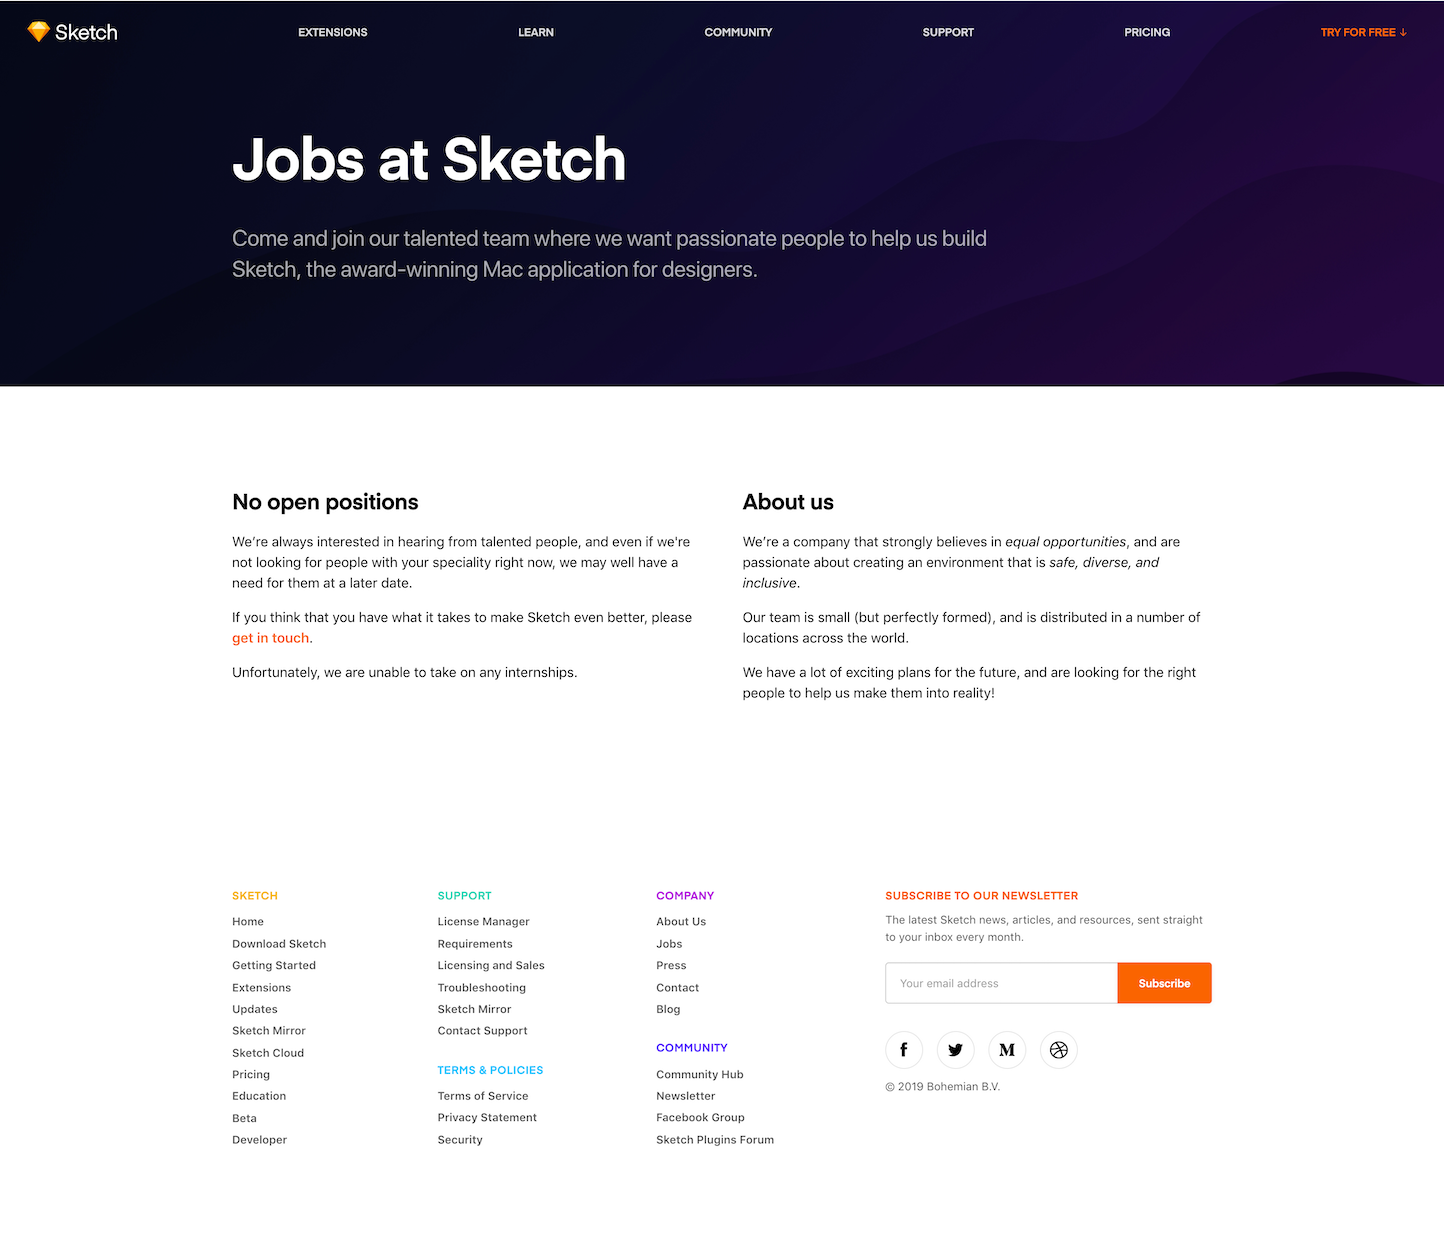 Screenshot of the Jobs page from the Sketch website.